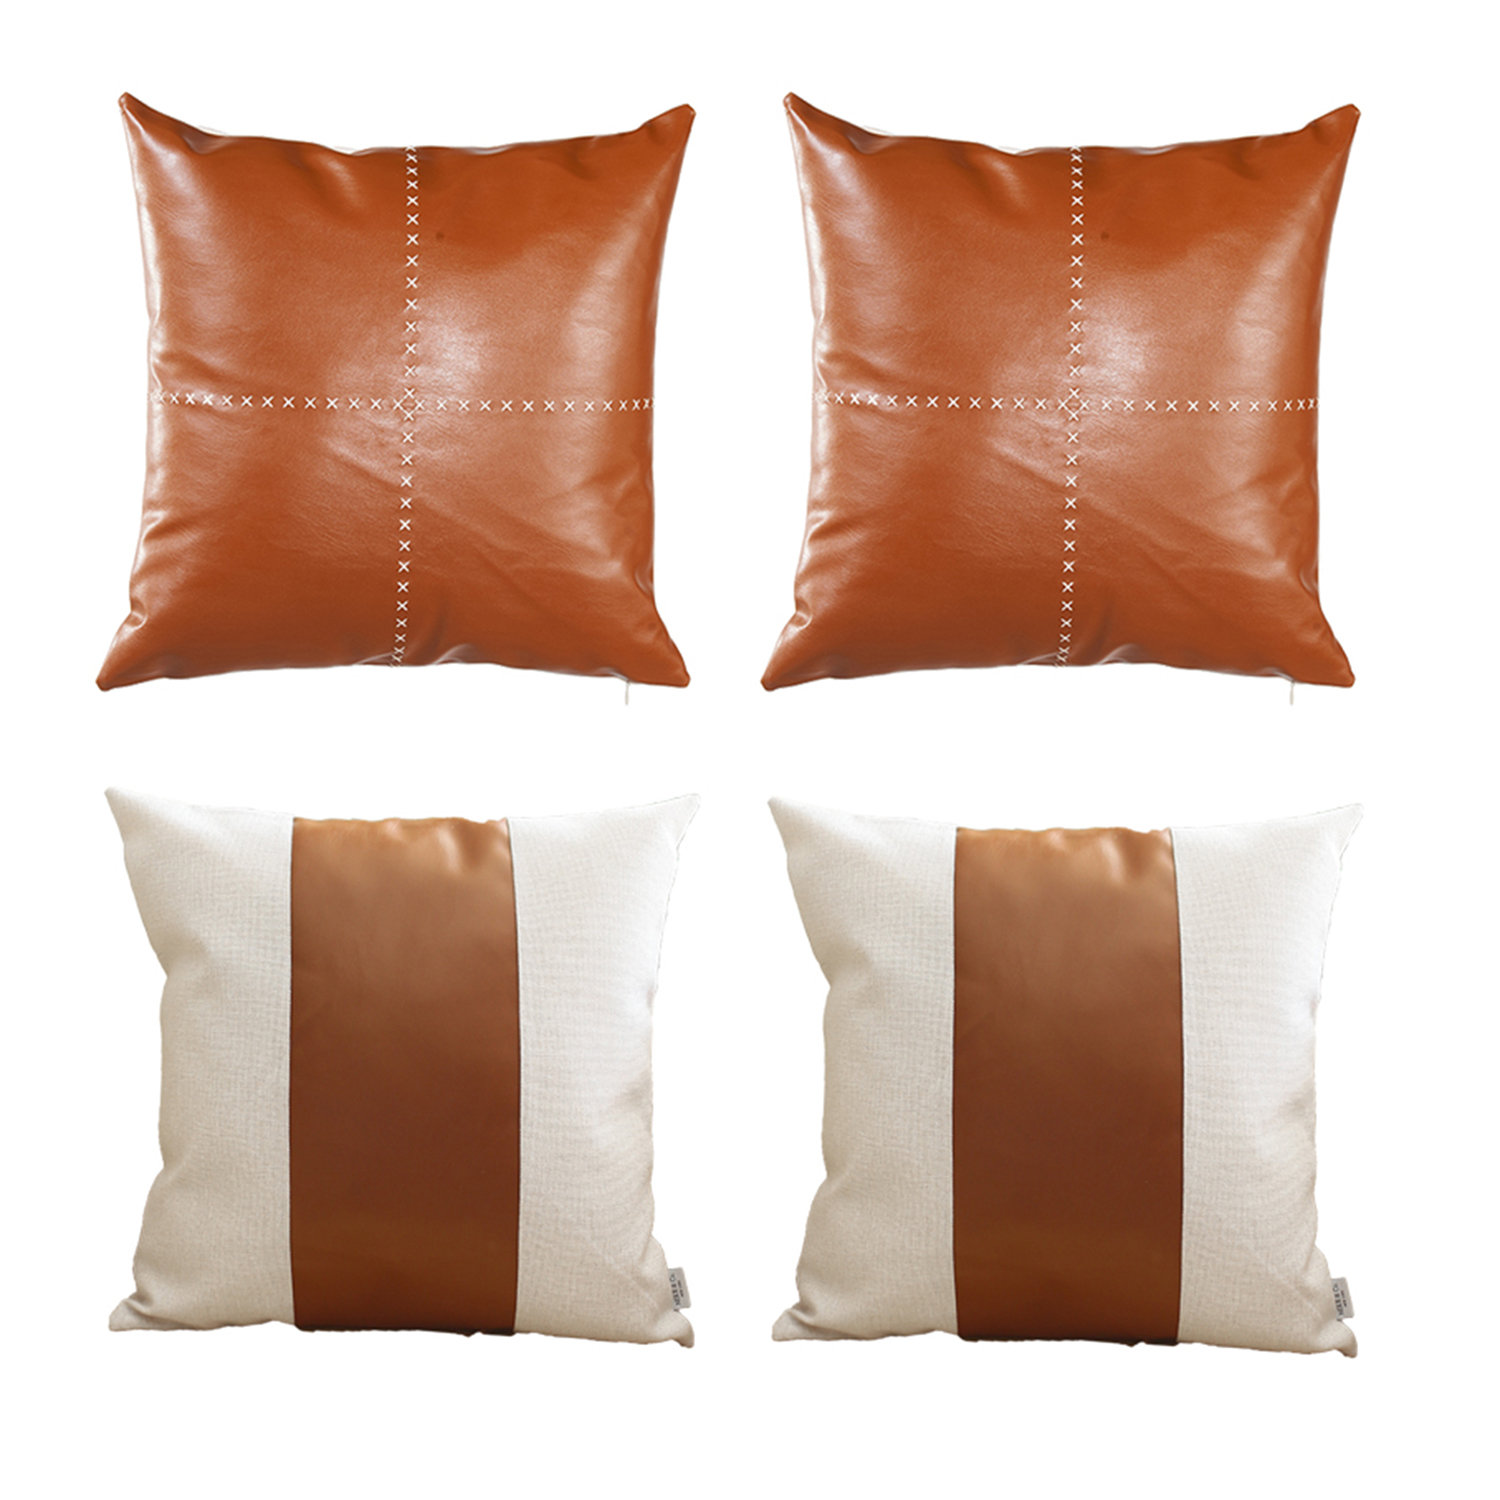 Mike&Co. New York Boho Embroidered Handmade Set of 4 Throw Pillow 18 x 18 Vegan Faux Leather Solid Brown & Beige Square for Couch, Bedding - Brown